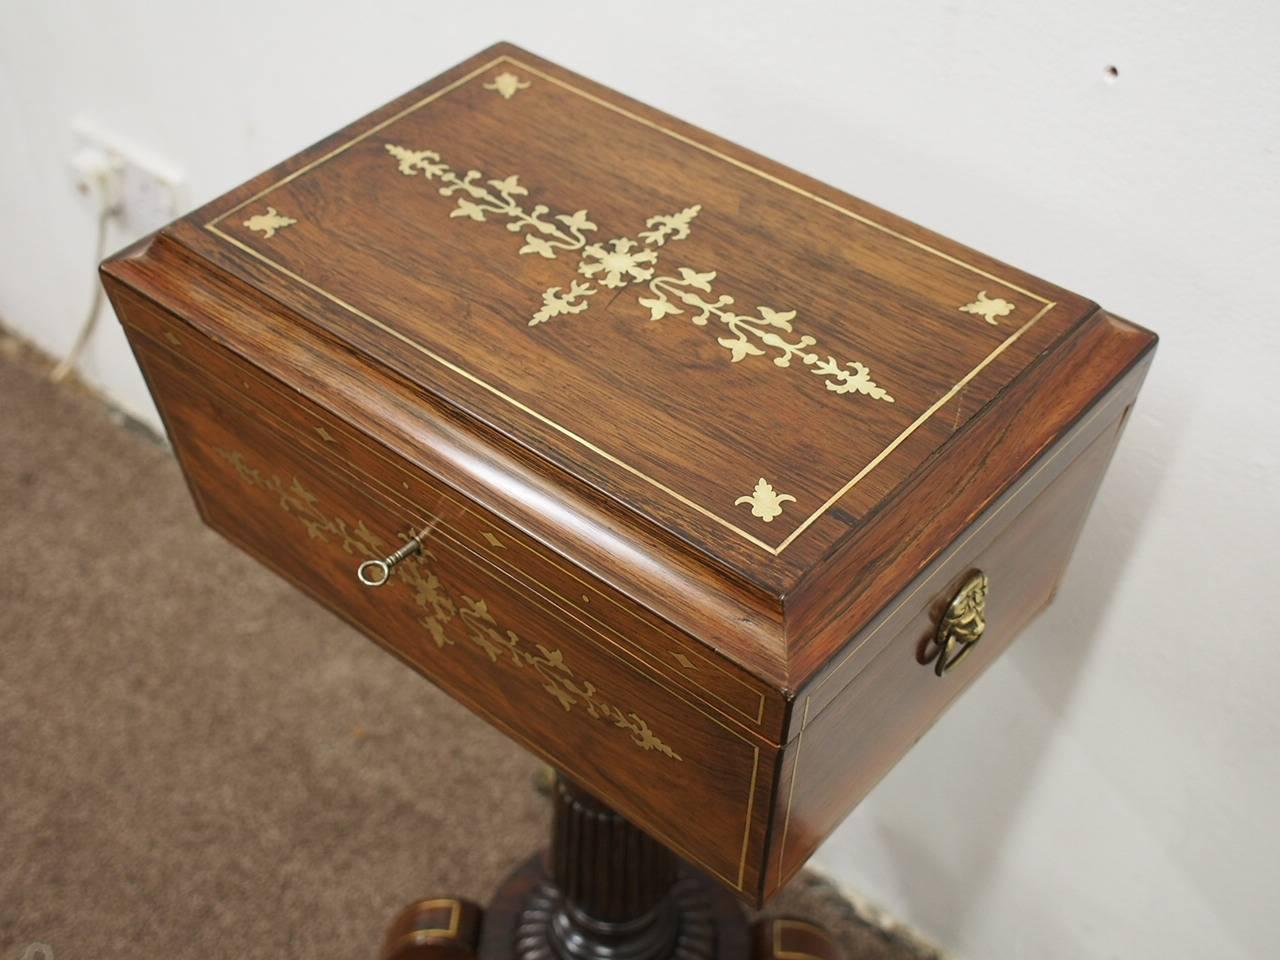 Rare Regency Rosewood and Brass Inlaid Teapoy on Stand, circa 1815 For Sale 1